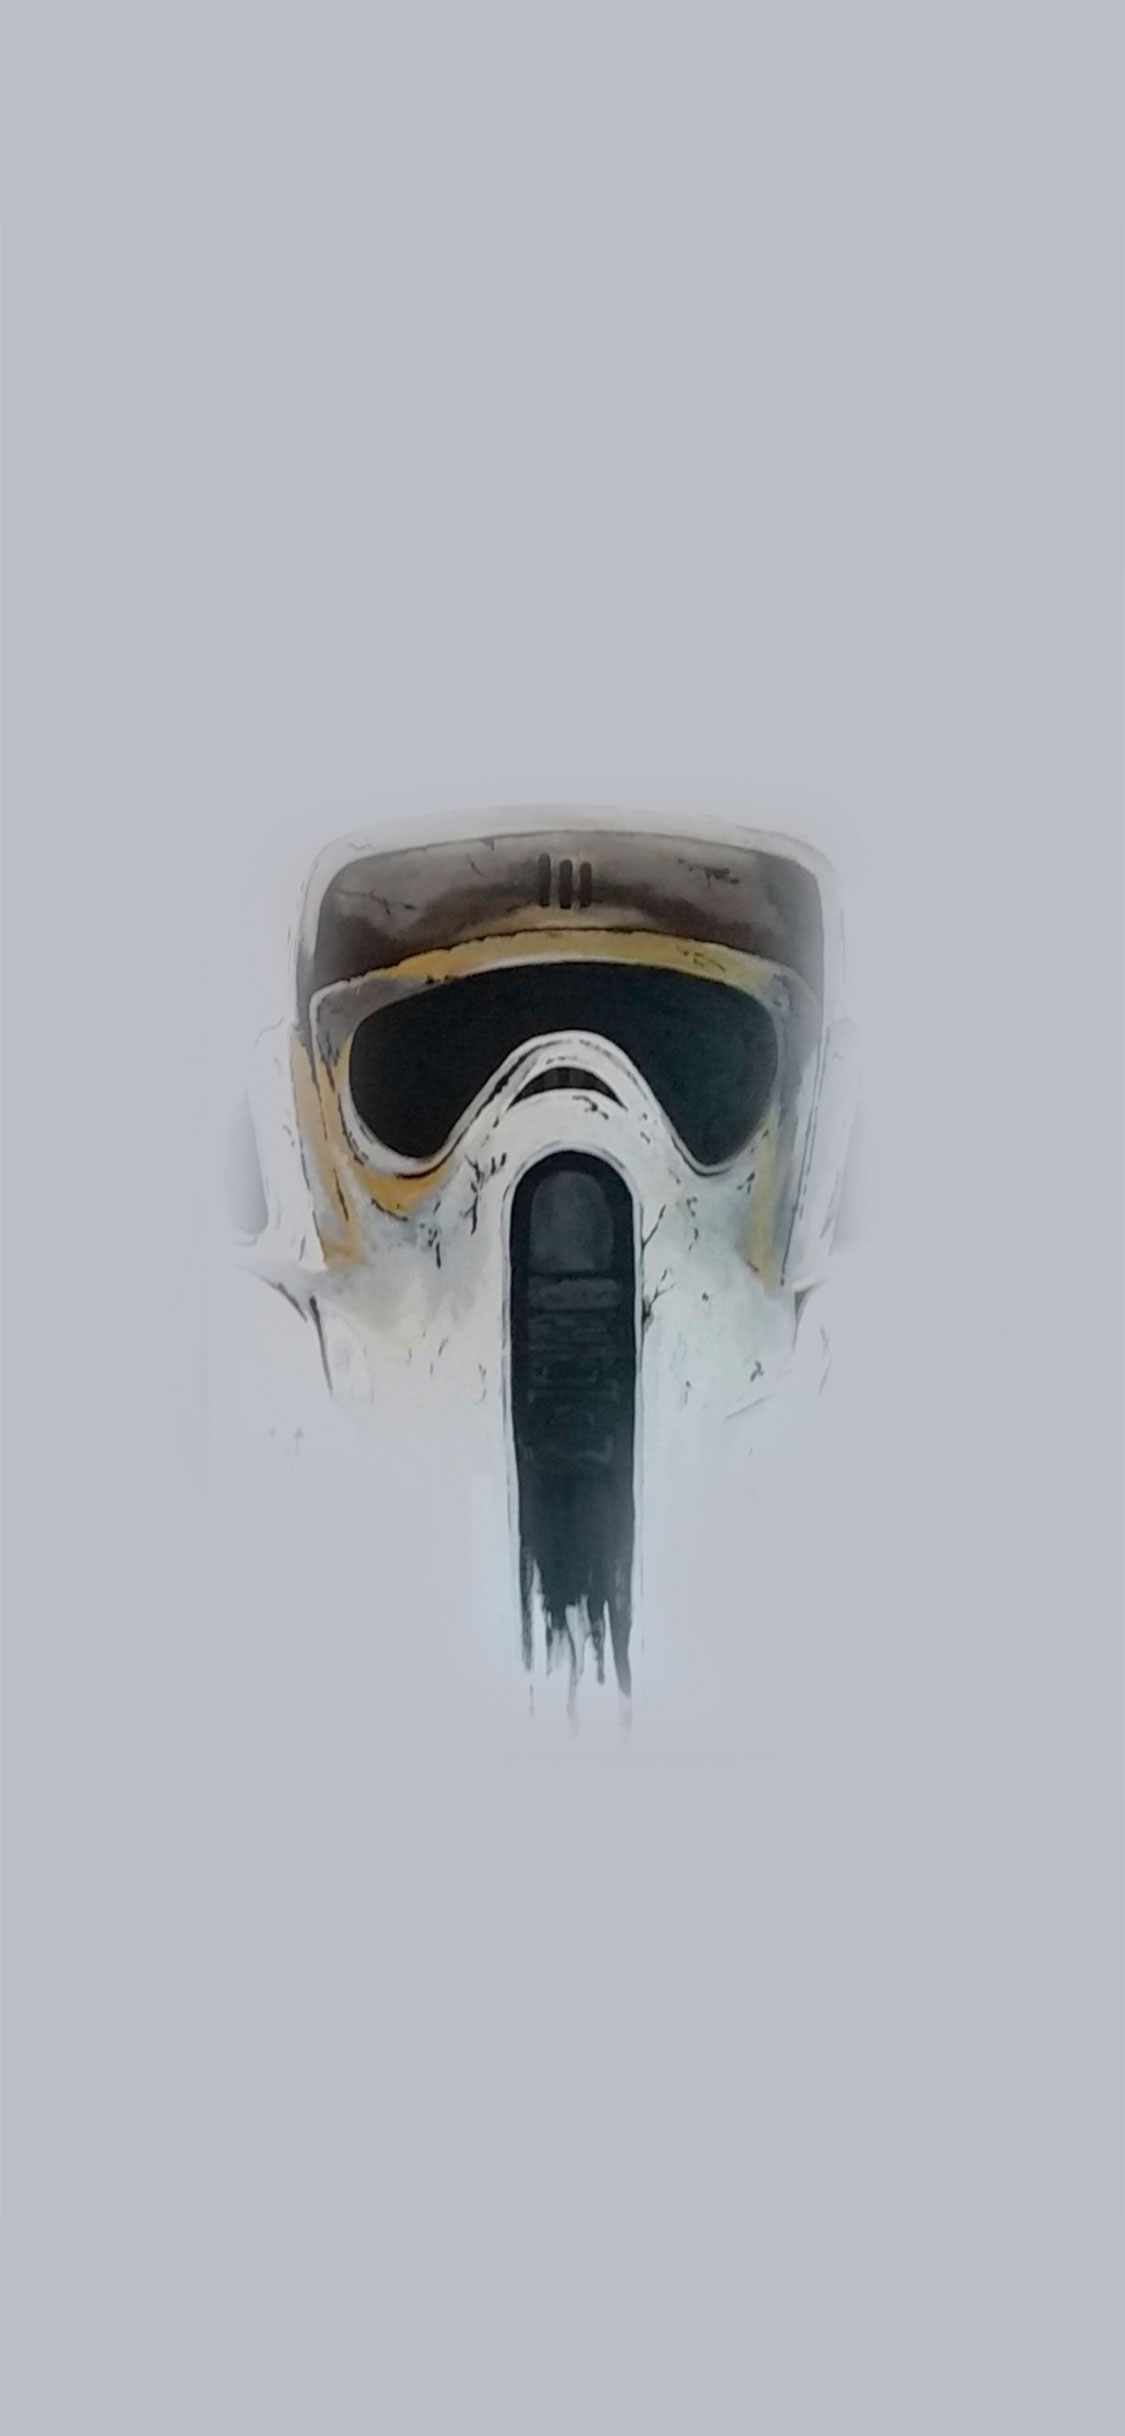 Star Wars Wallpaper For iPhone X On